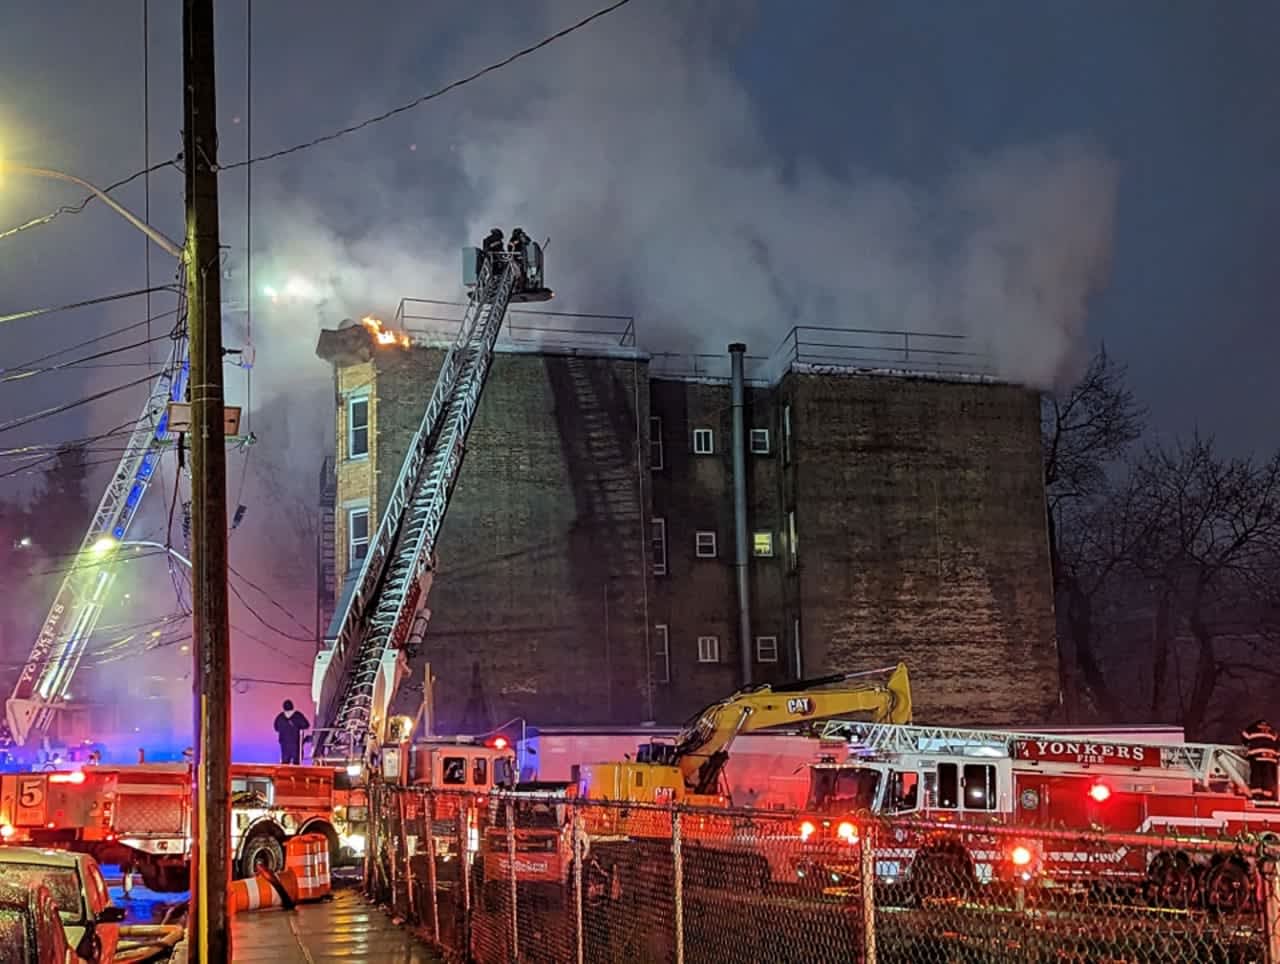 Firefighters battle a blaze in Yonkers at an apartment building at 21 Mulberry St.